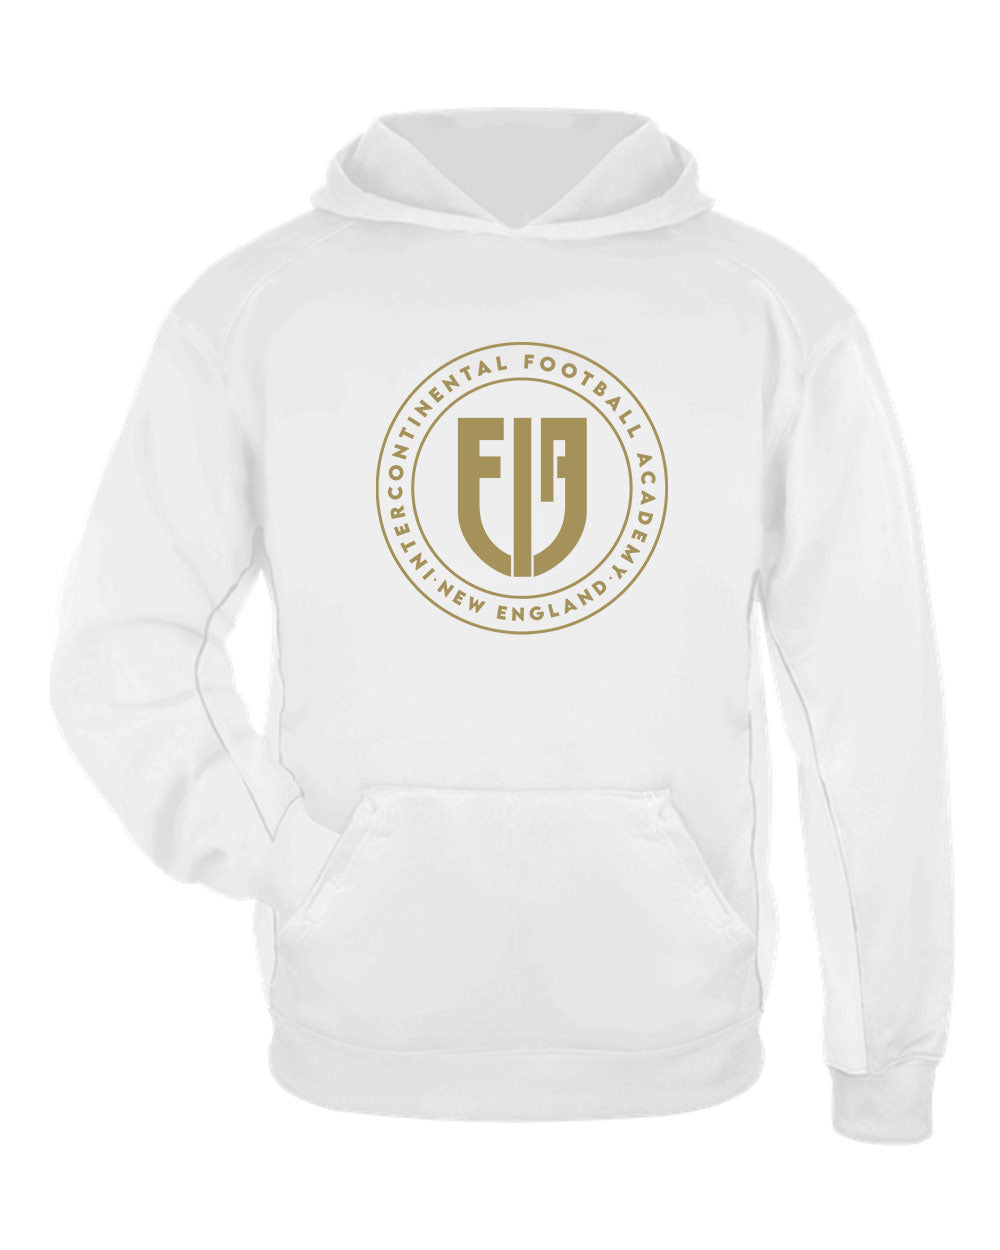 IFA Youth Performance Fleece Hoodie "Classic" - 2454 (color options available)